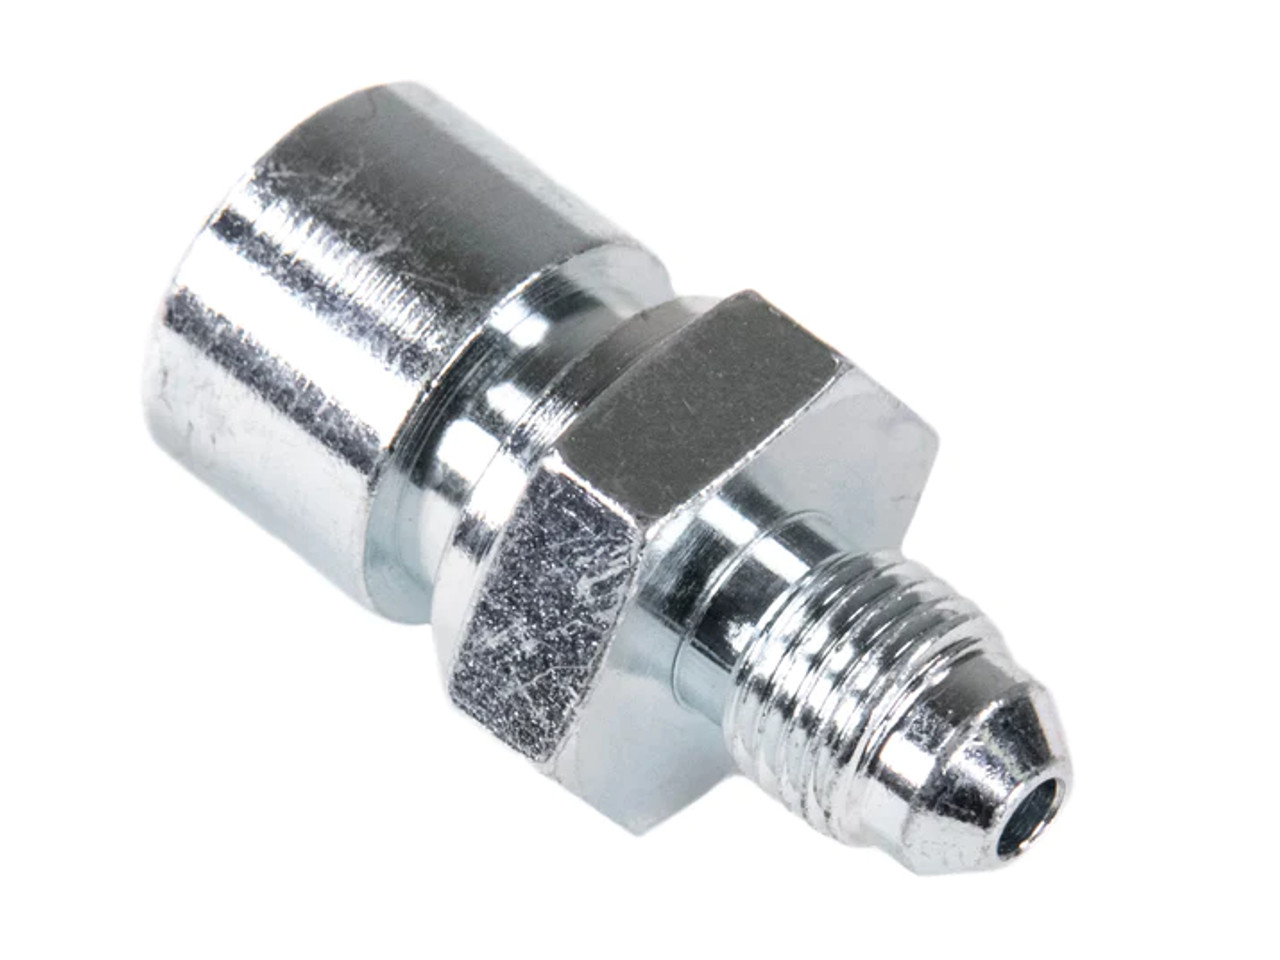 Brake Hardline Fitting, Male -3 AN to Female 10mm x 1.0 in. female inverted flare, Steel, Zinc Plated, Each 650202 Fragola